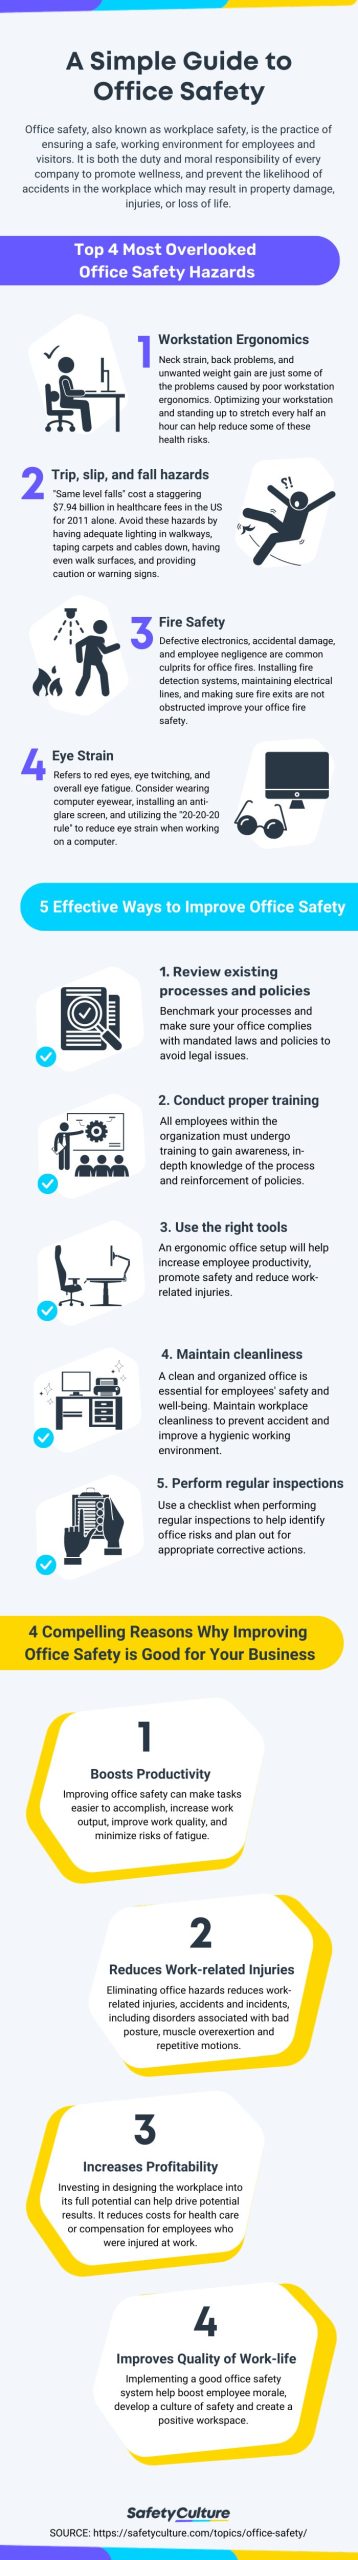 office-safety-infographic